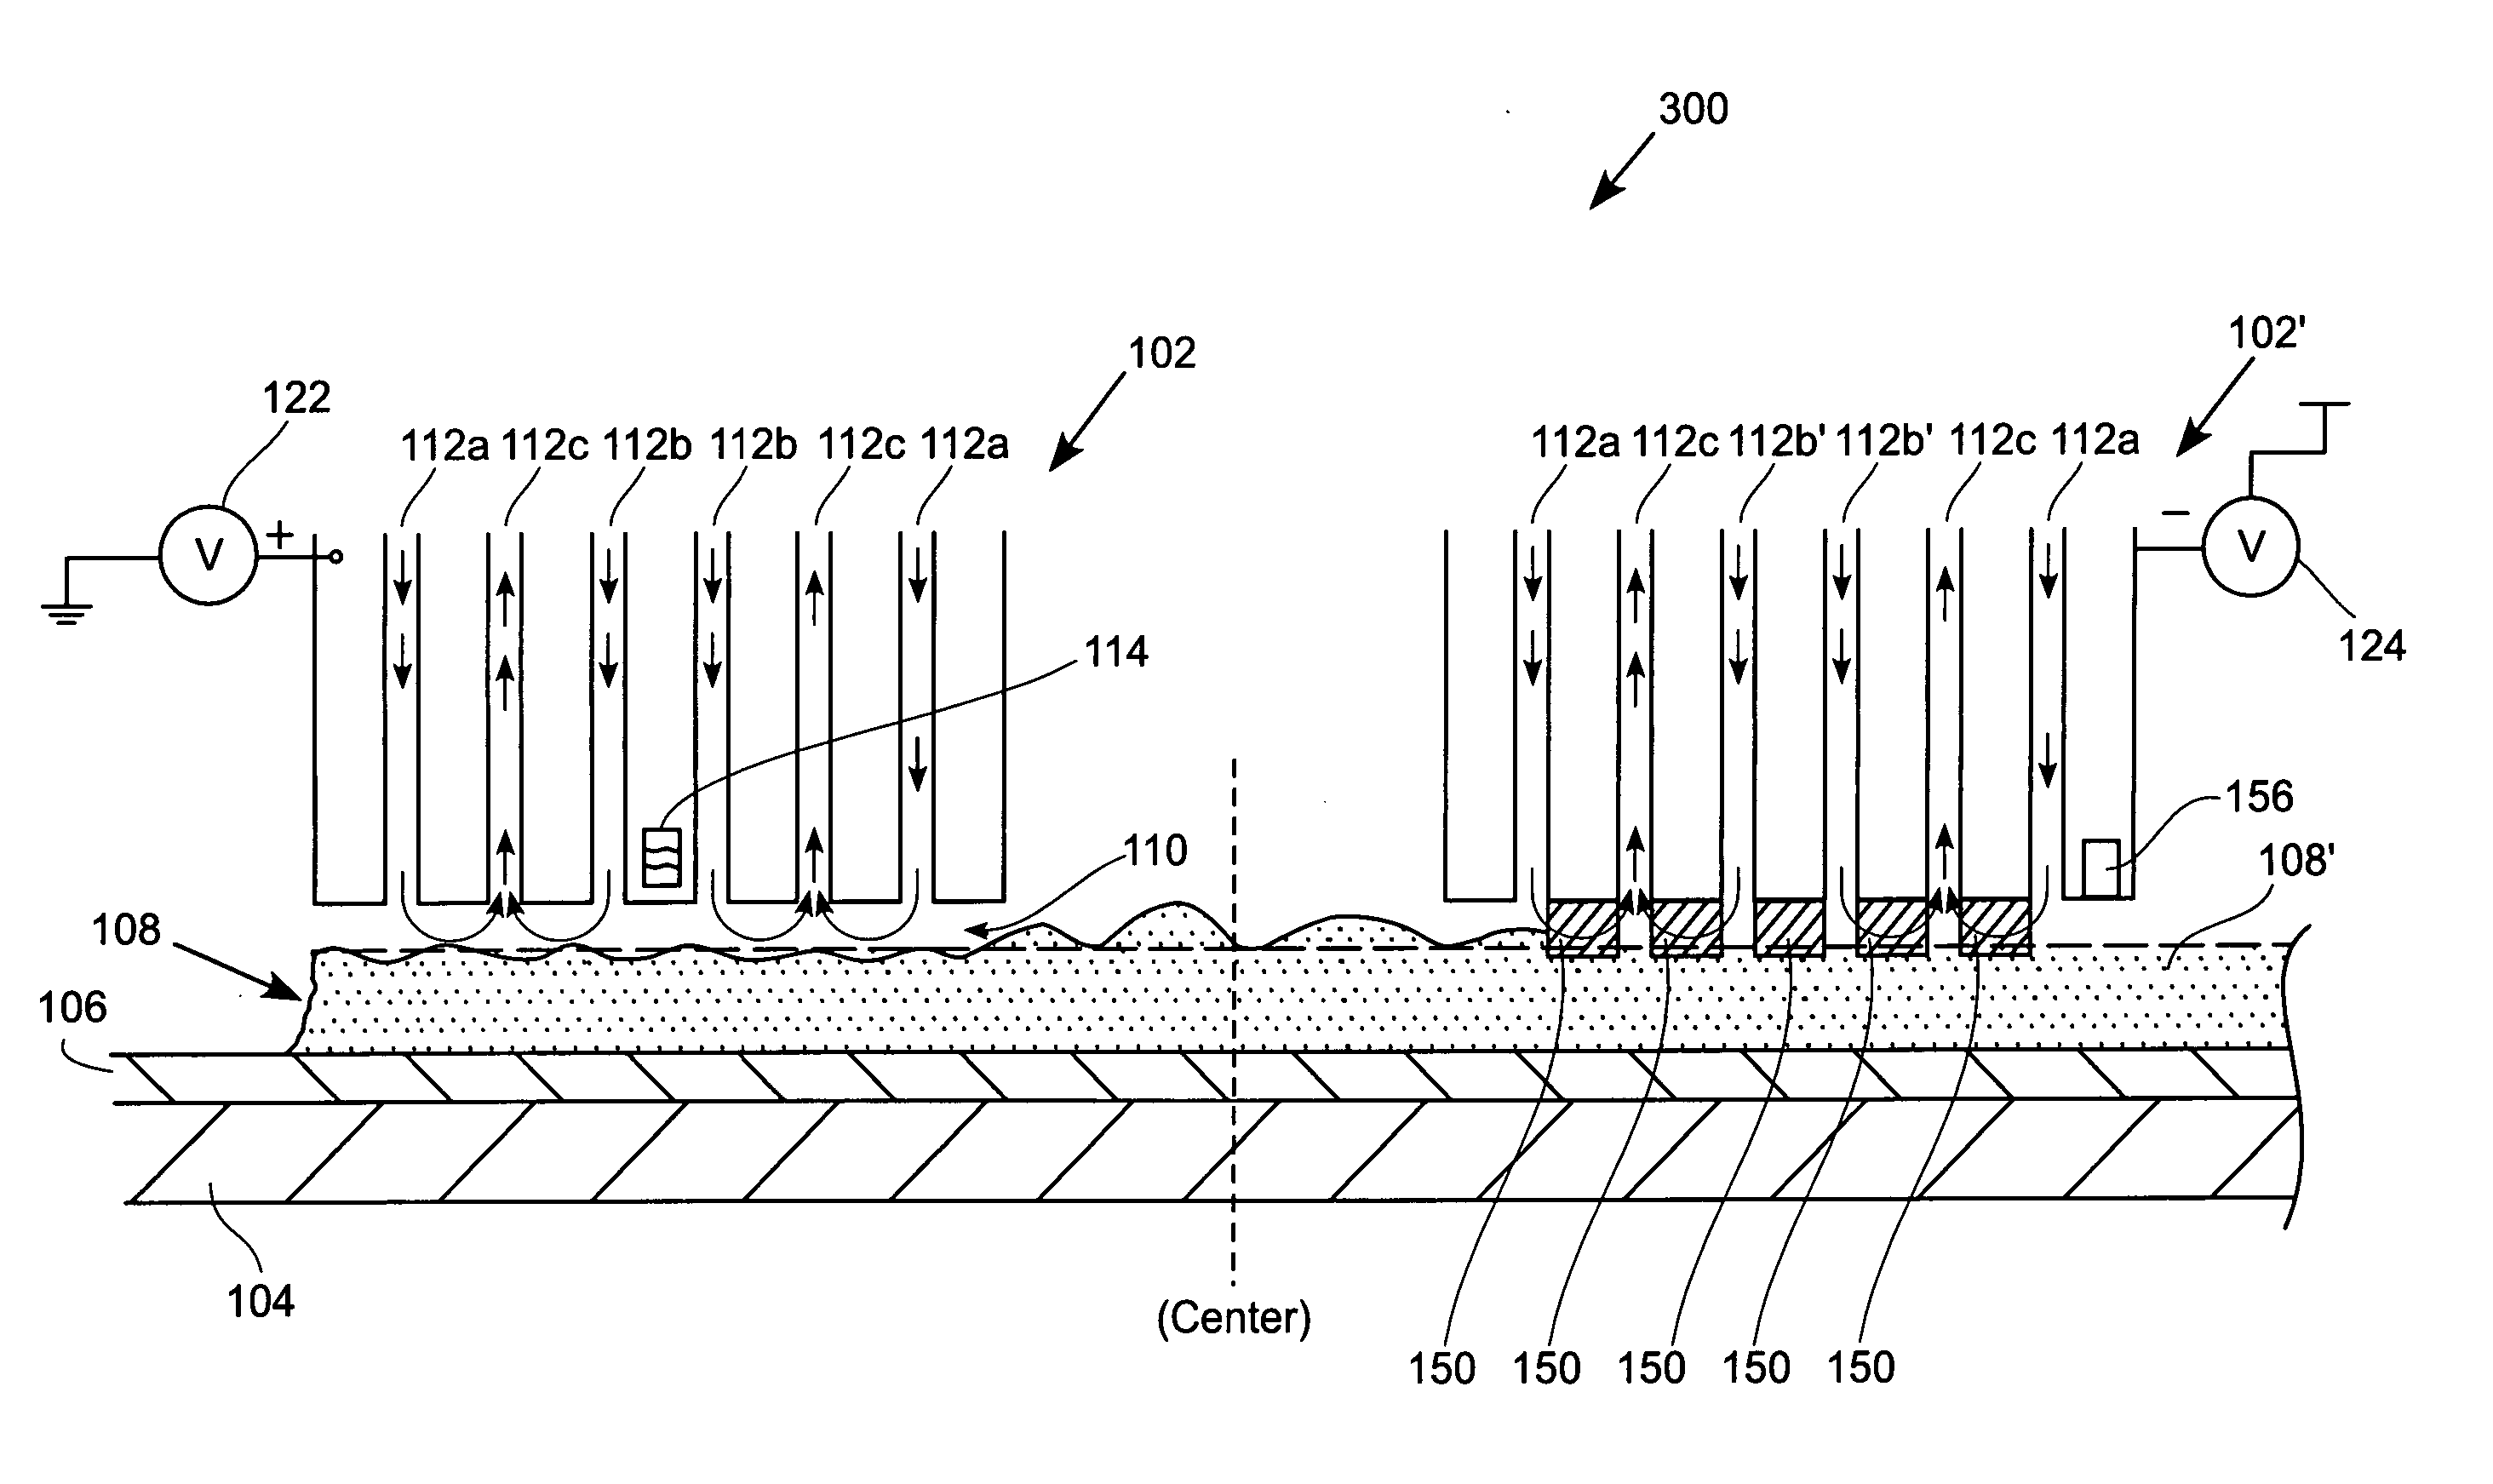 Apparatus and method for depositing and planarizing thin films of semiconductor wafers